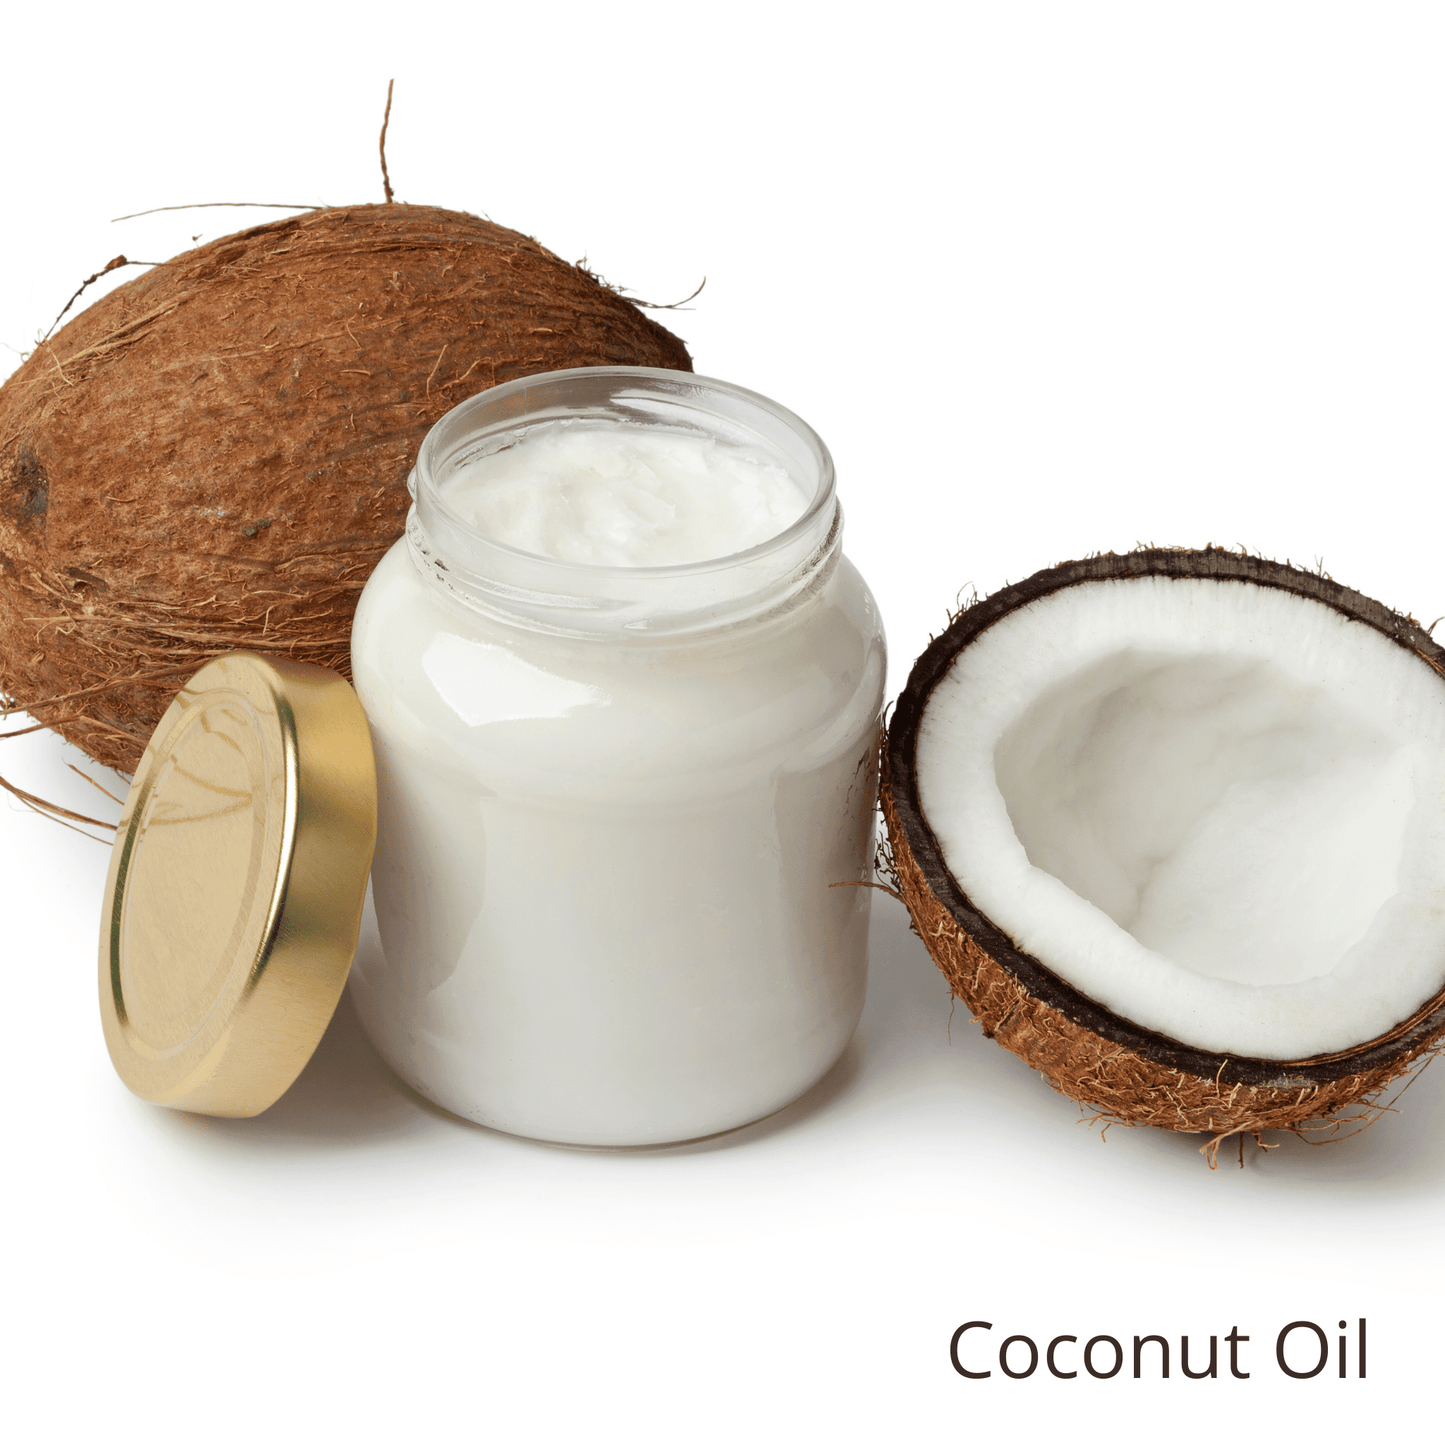 coconut oil in Be Green Bath and Body Body Lotion Trial